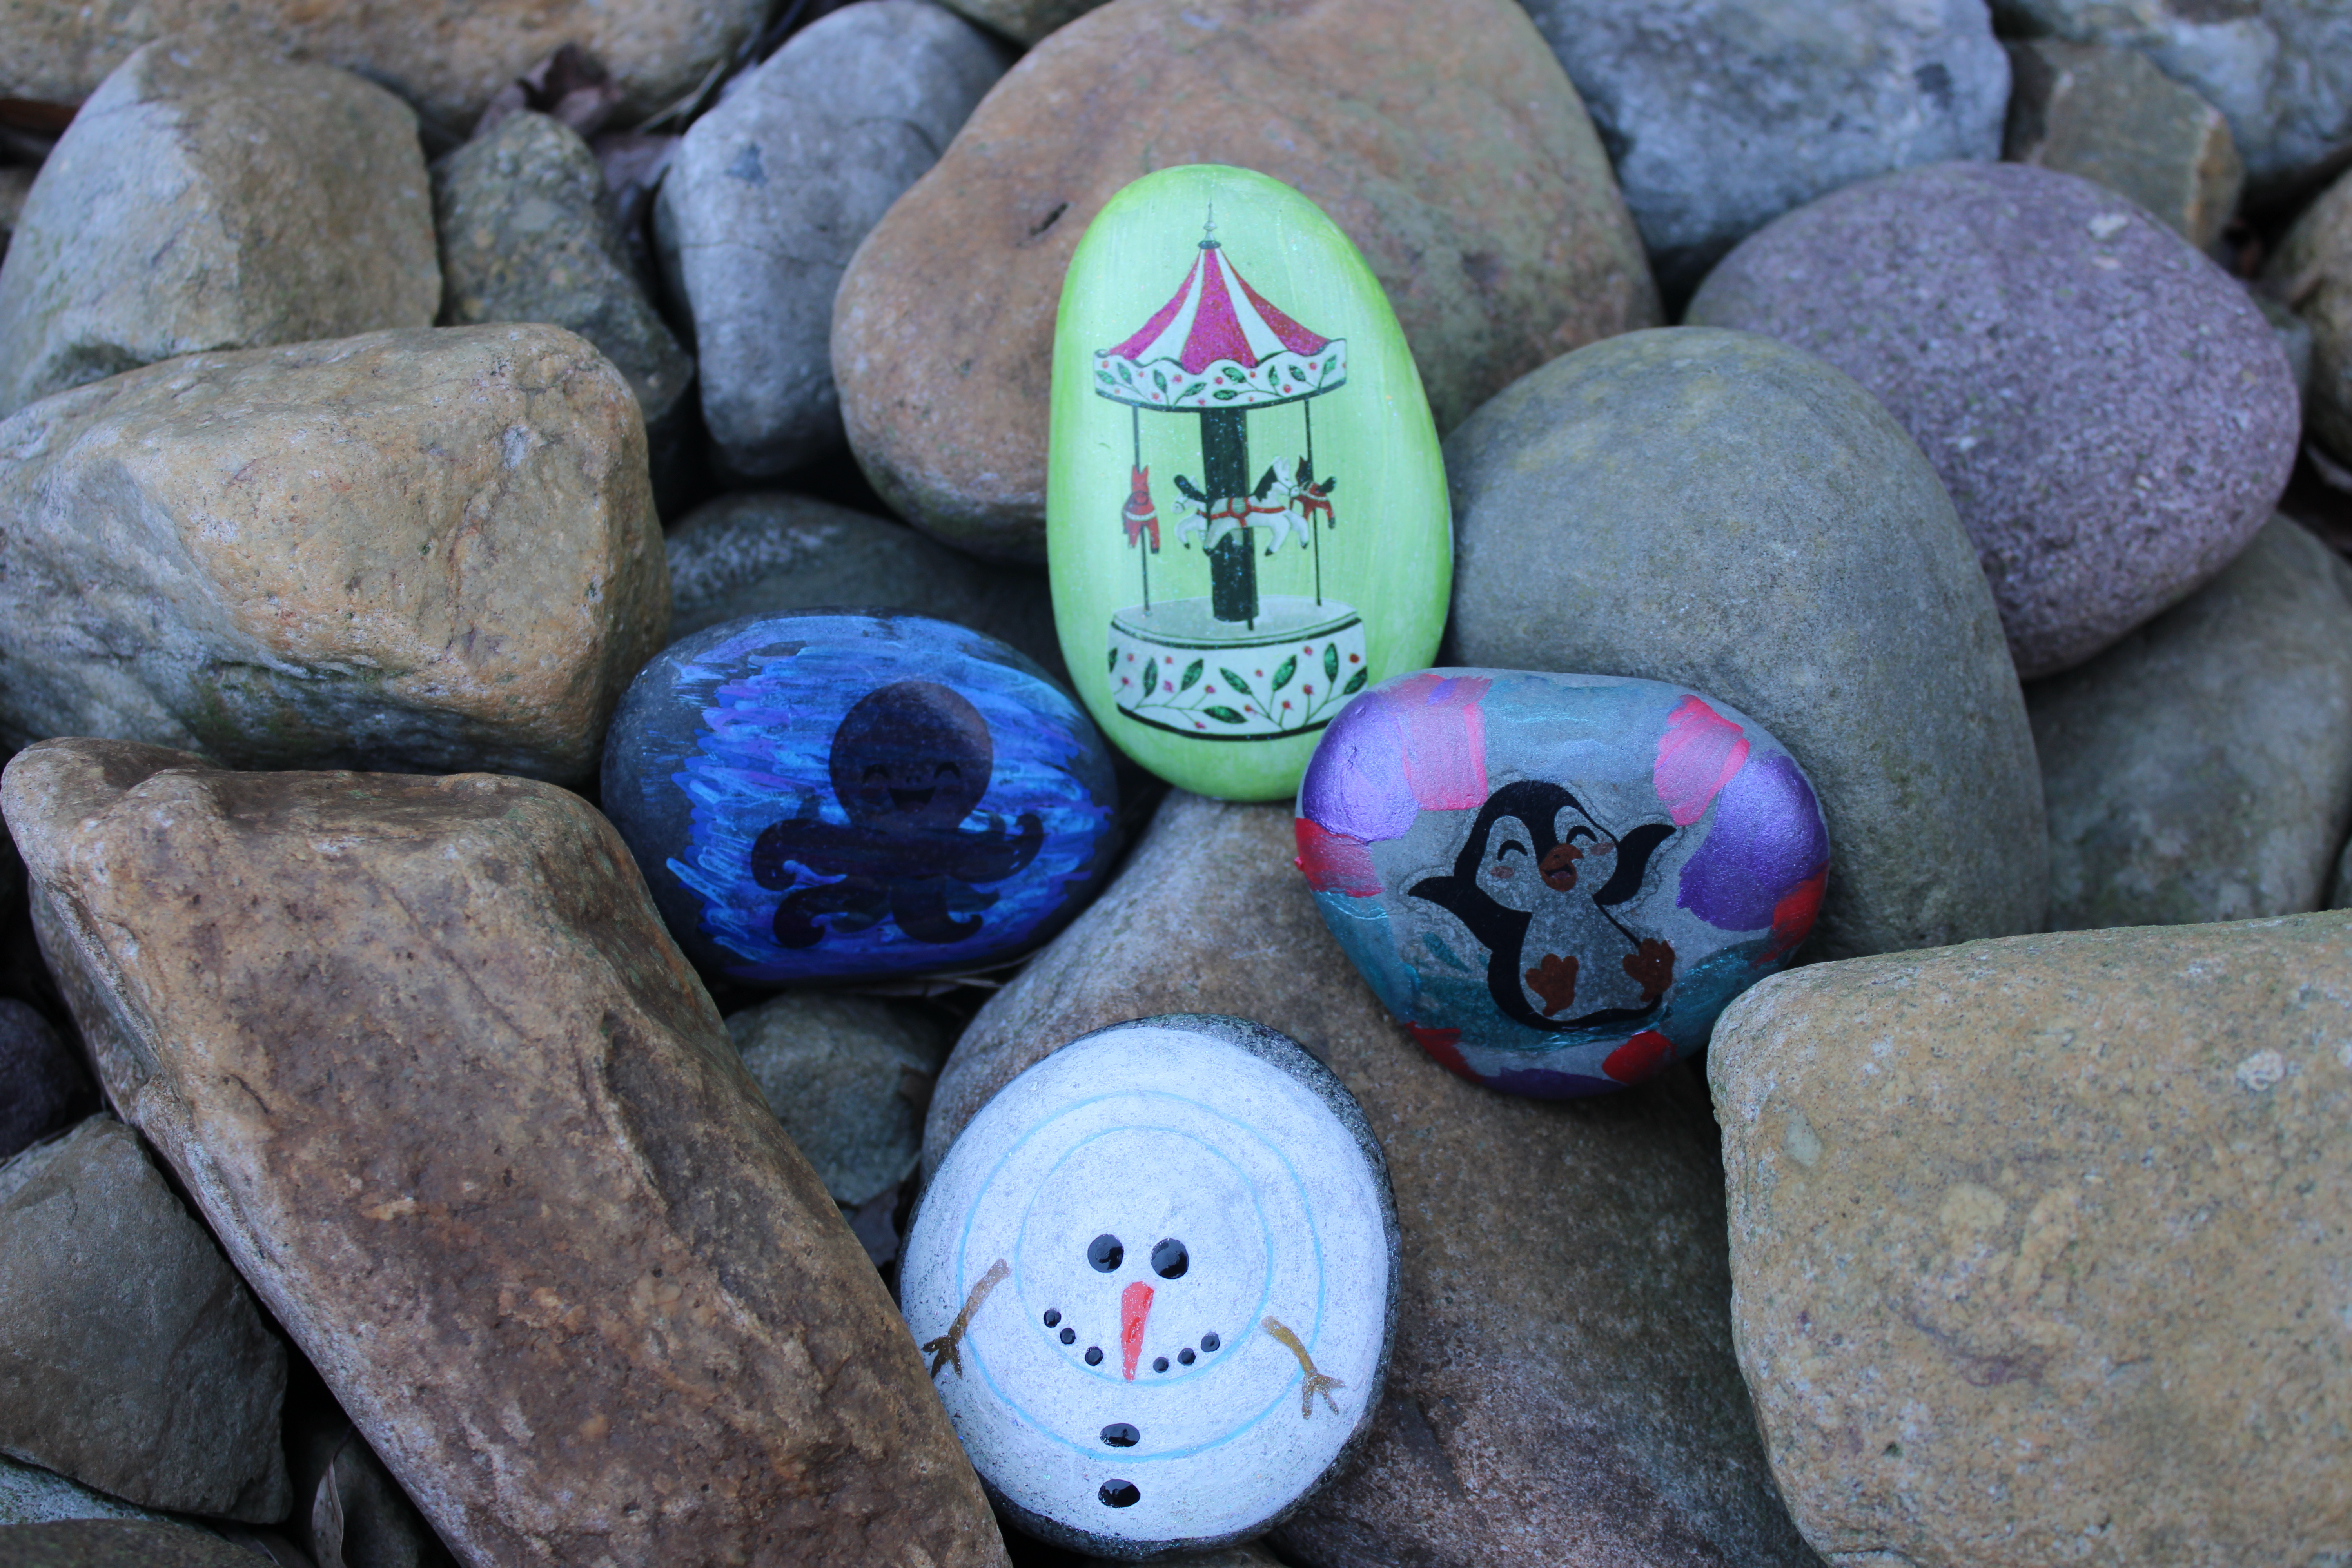 Four rocks decorated with paint and tattoo surrounded by plain rocks.